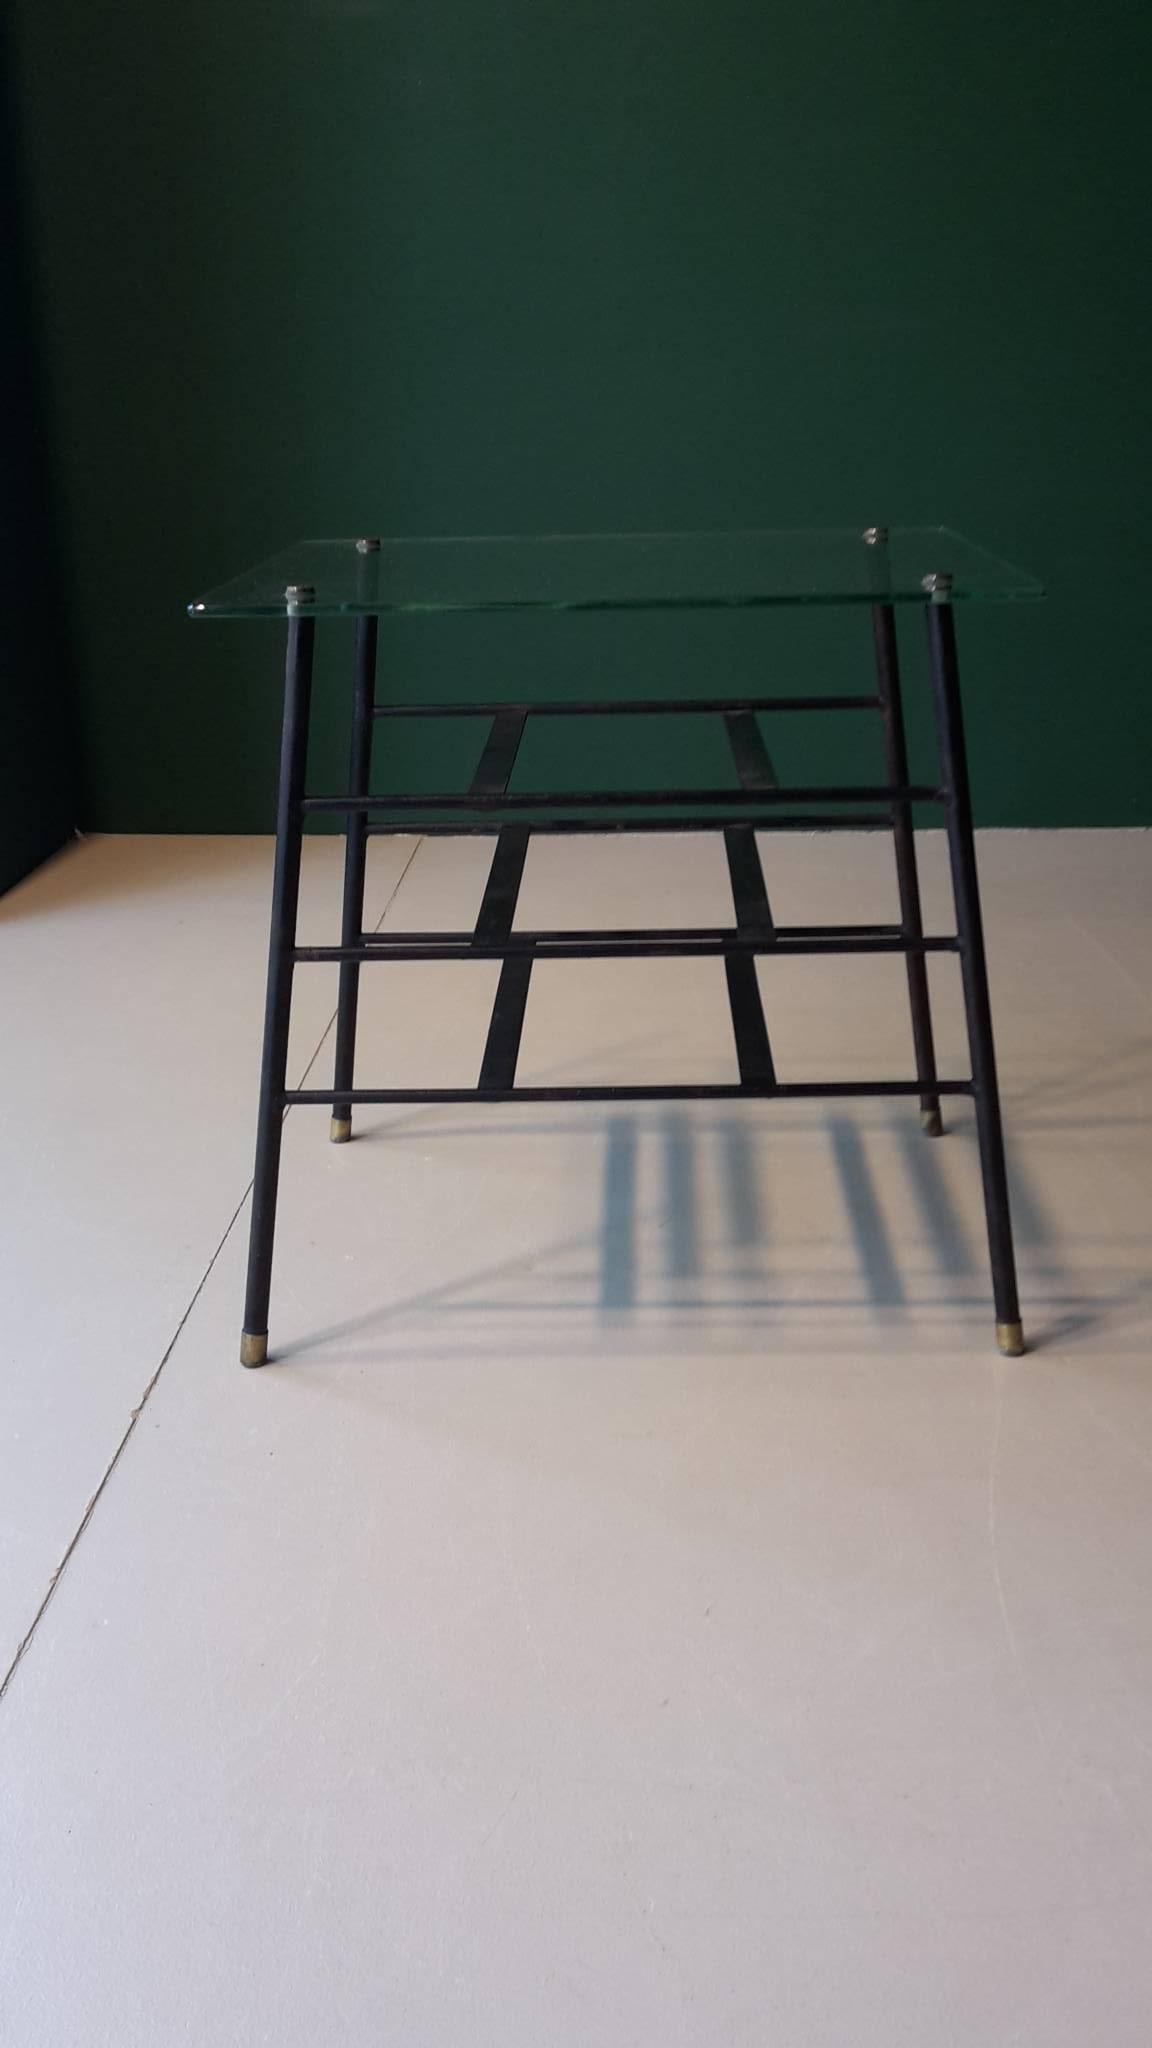 20th century French side table 1960s made of glass, brass and metal.